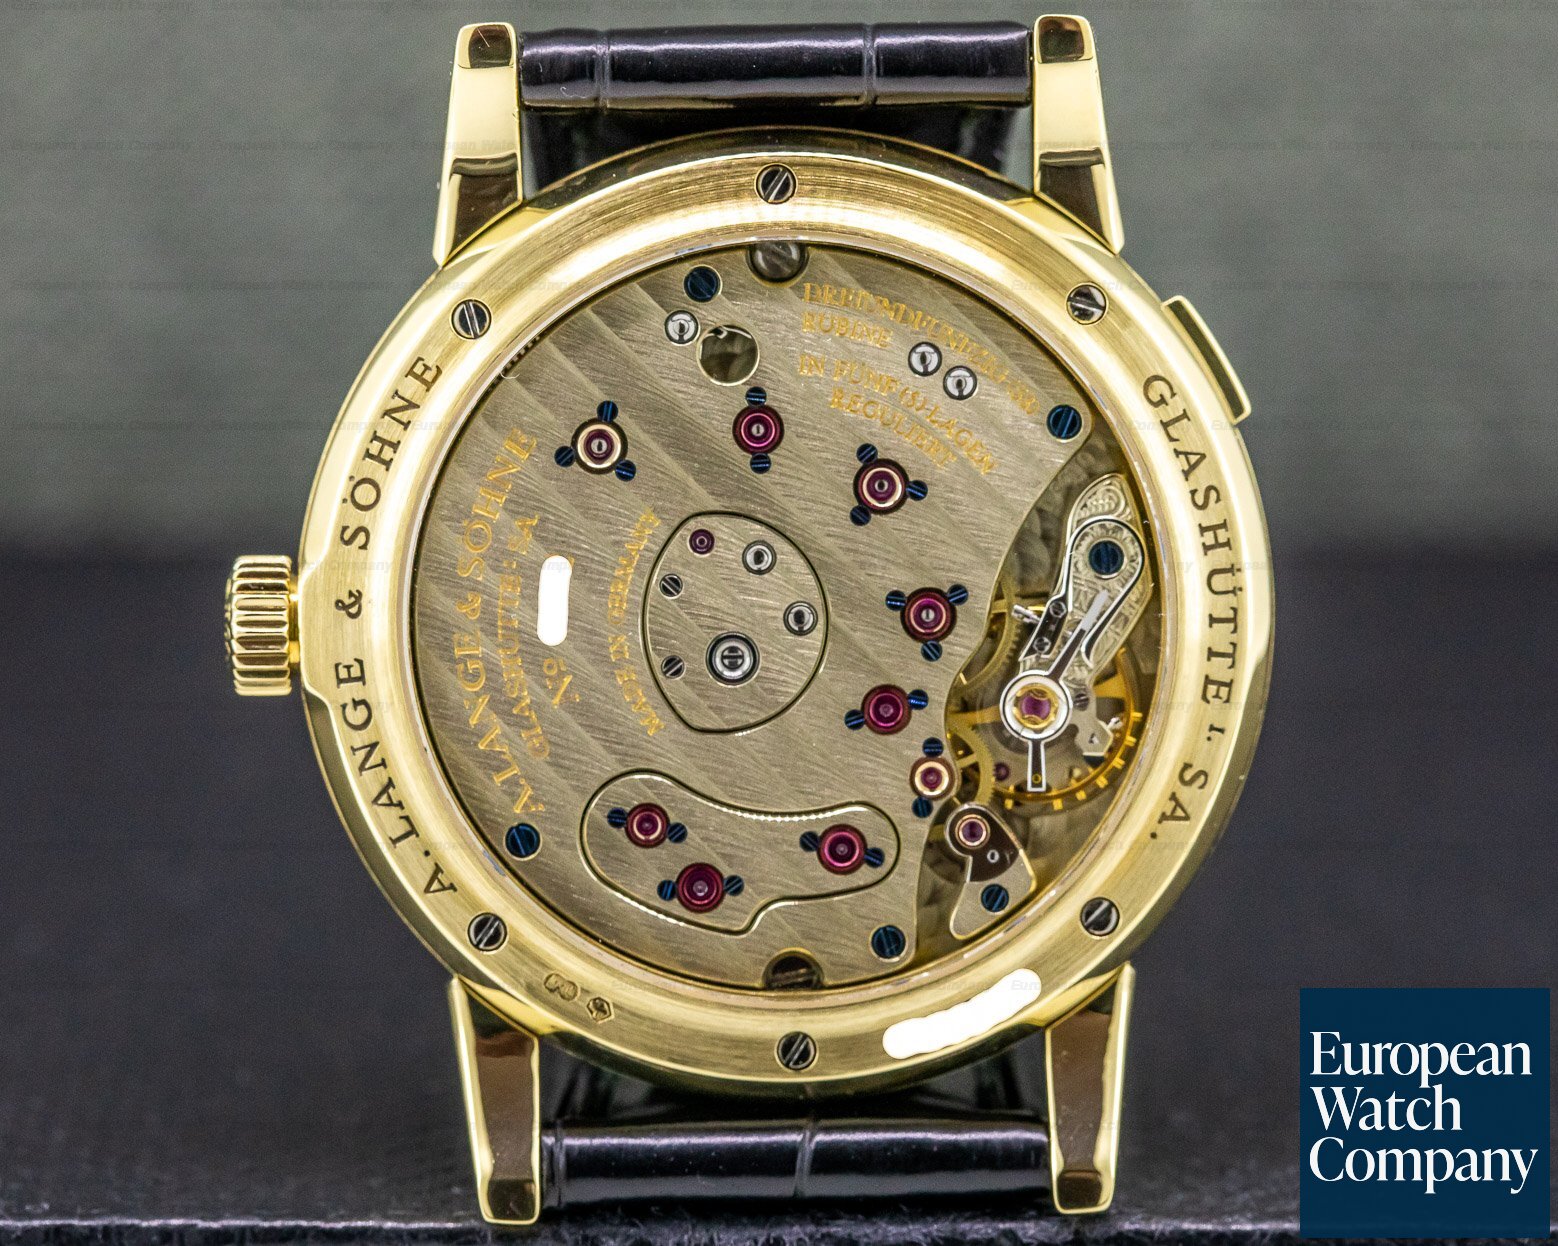 A. Lange and Sohne Lange 1 Yellow Gold Blue Dial Ref. 101.028